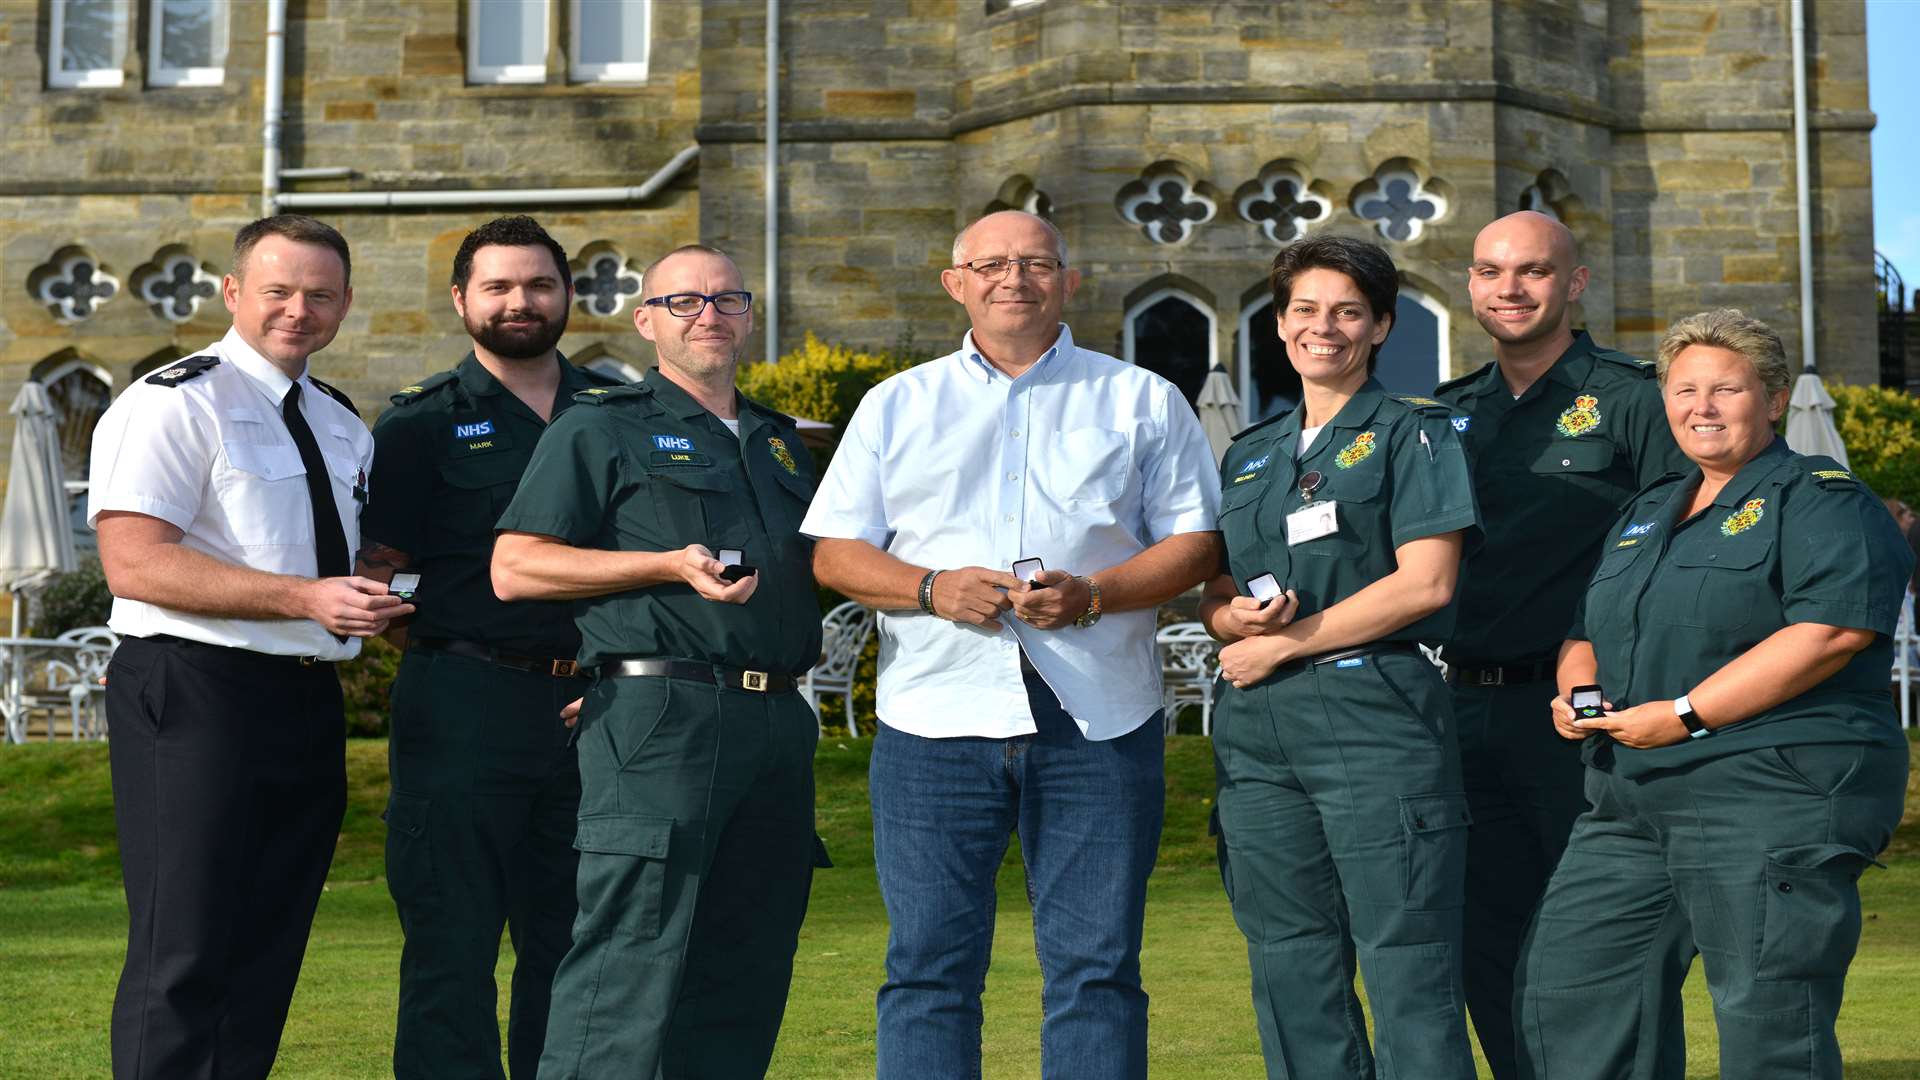 Paul Fowler with the ambulance crew who helped saved his life